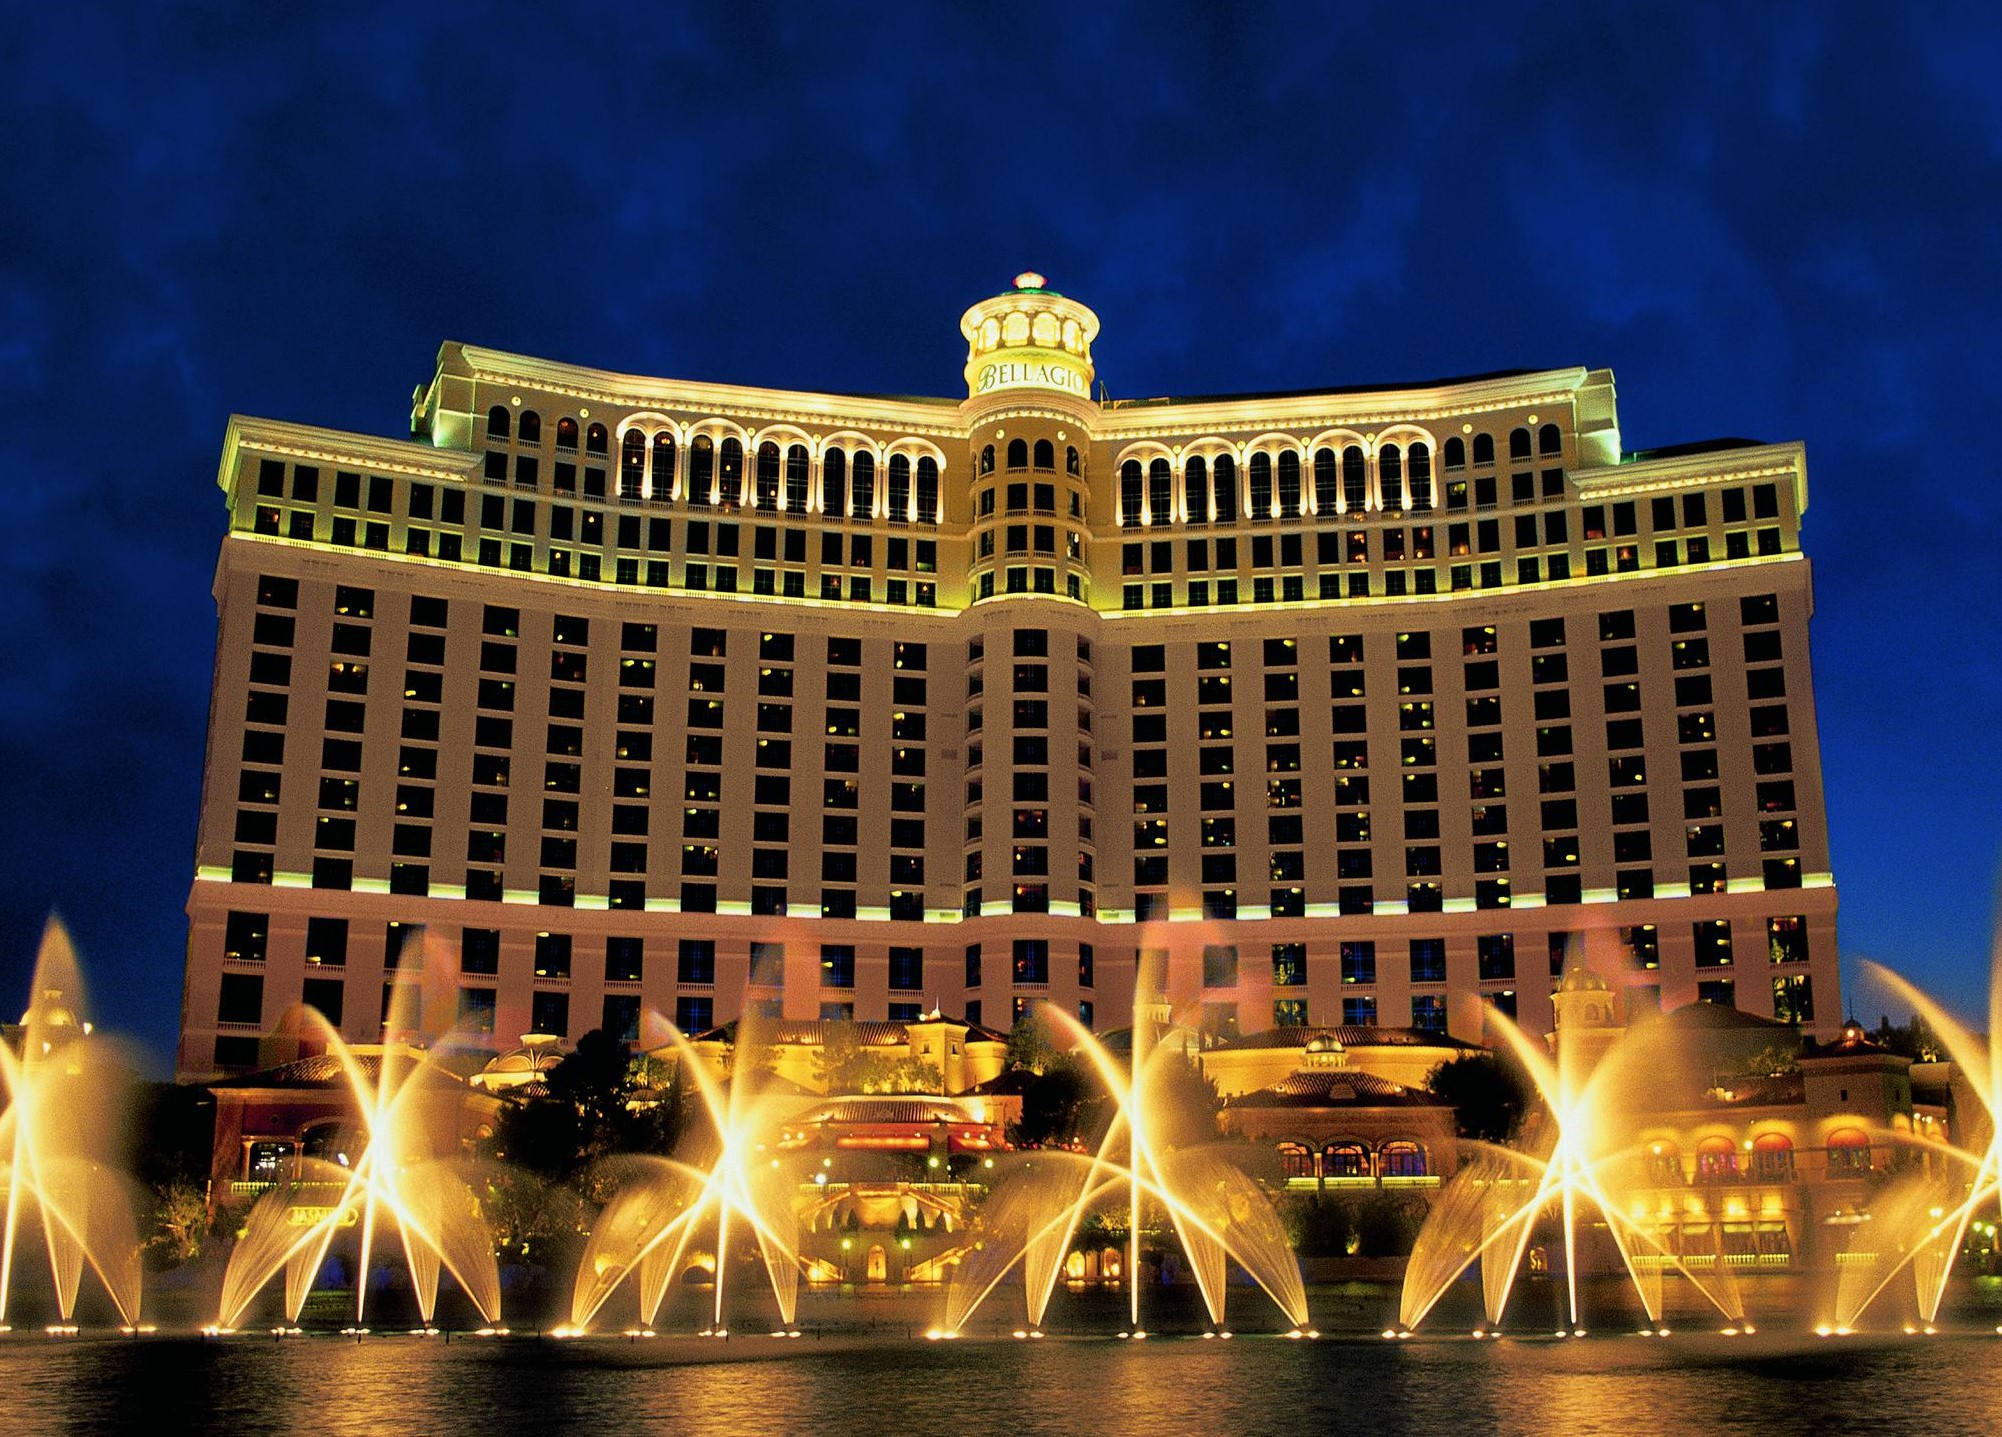 Things to See/Do in Bellagio (Las Vegas) EazyNazy